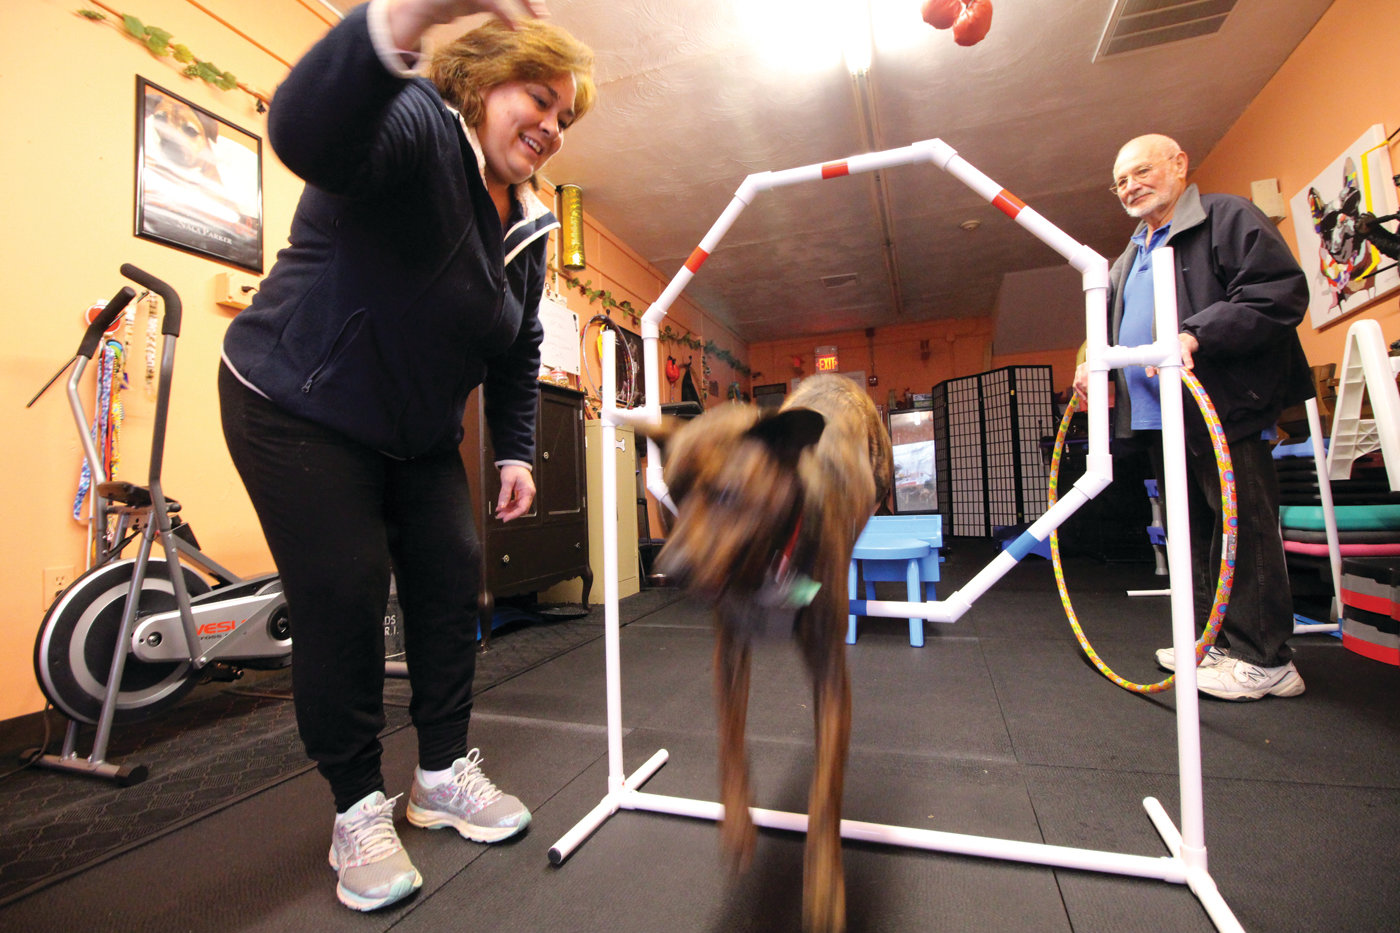 GOING THROUGH HOOPS: Deb Quattrini gets Hunter to leap through a hoop at the Ruff Wrangler Canine Workout Center in Conimicut.